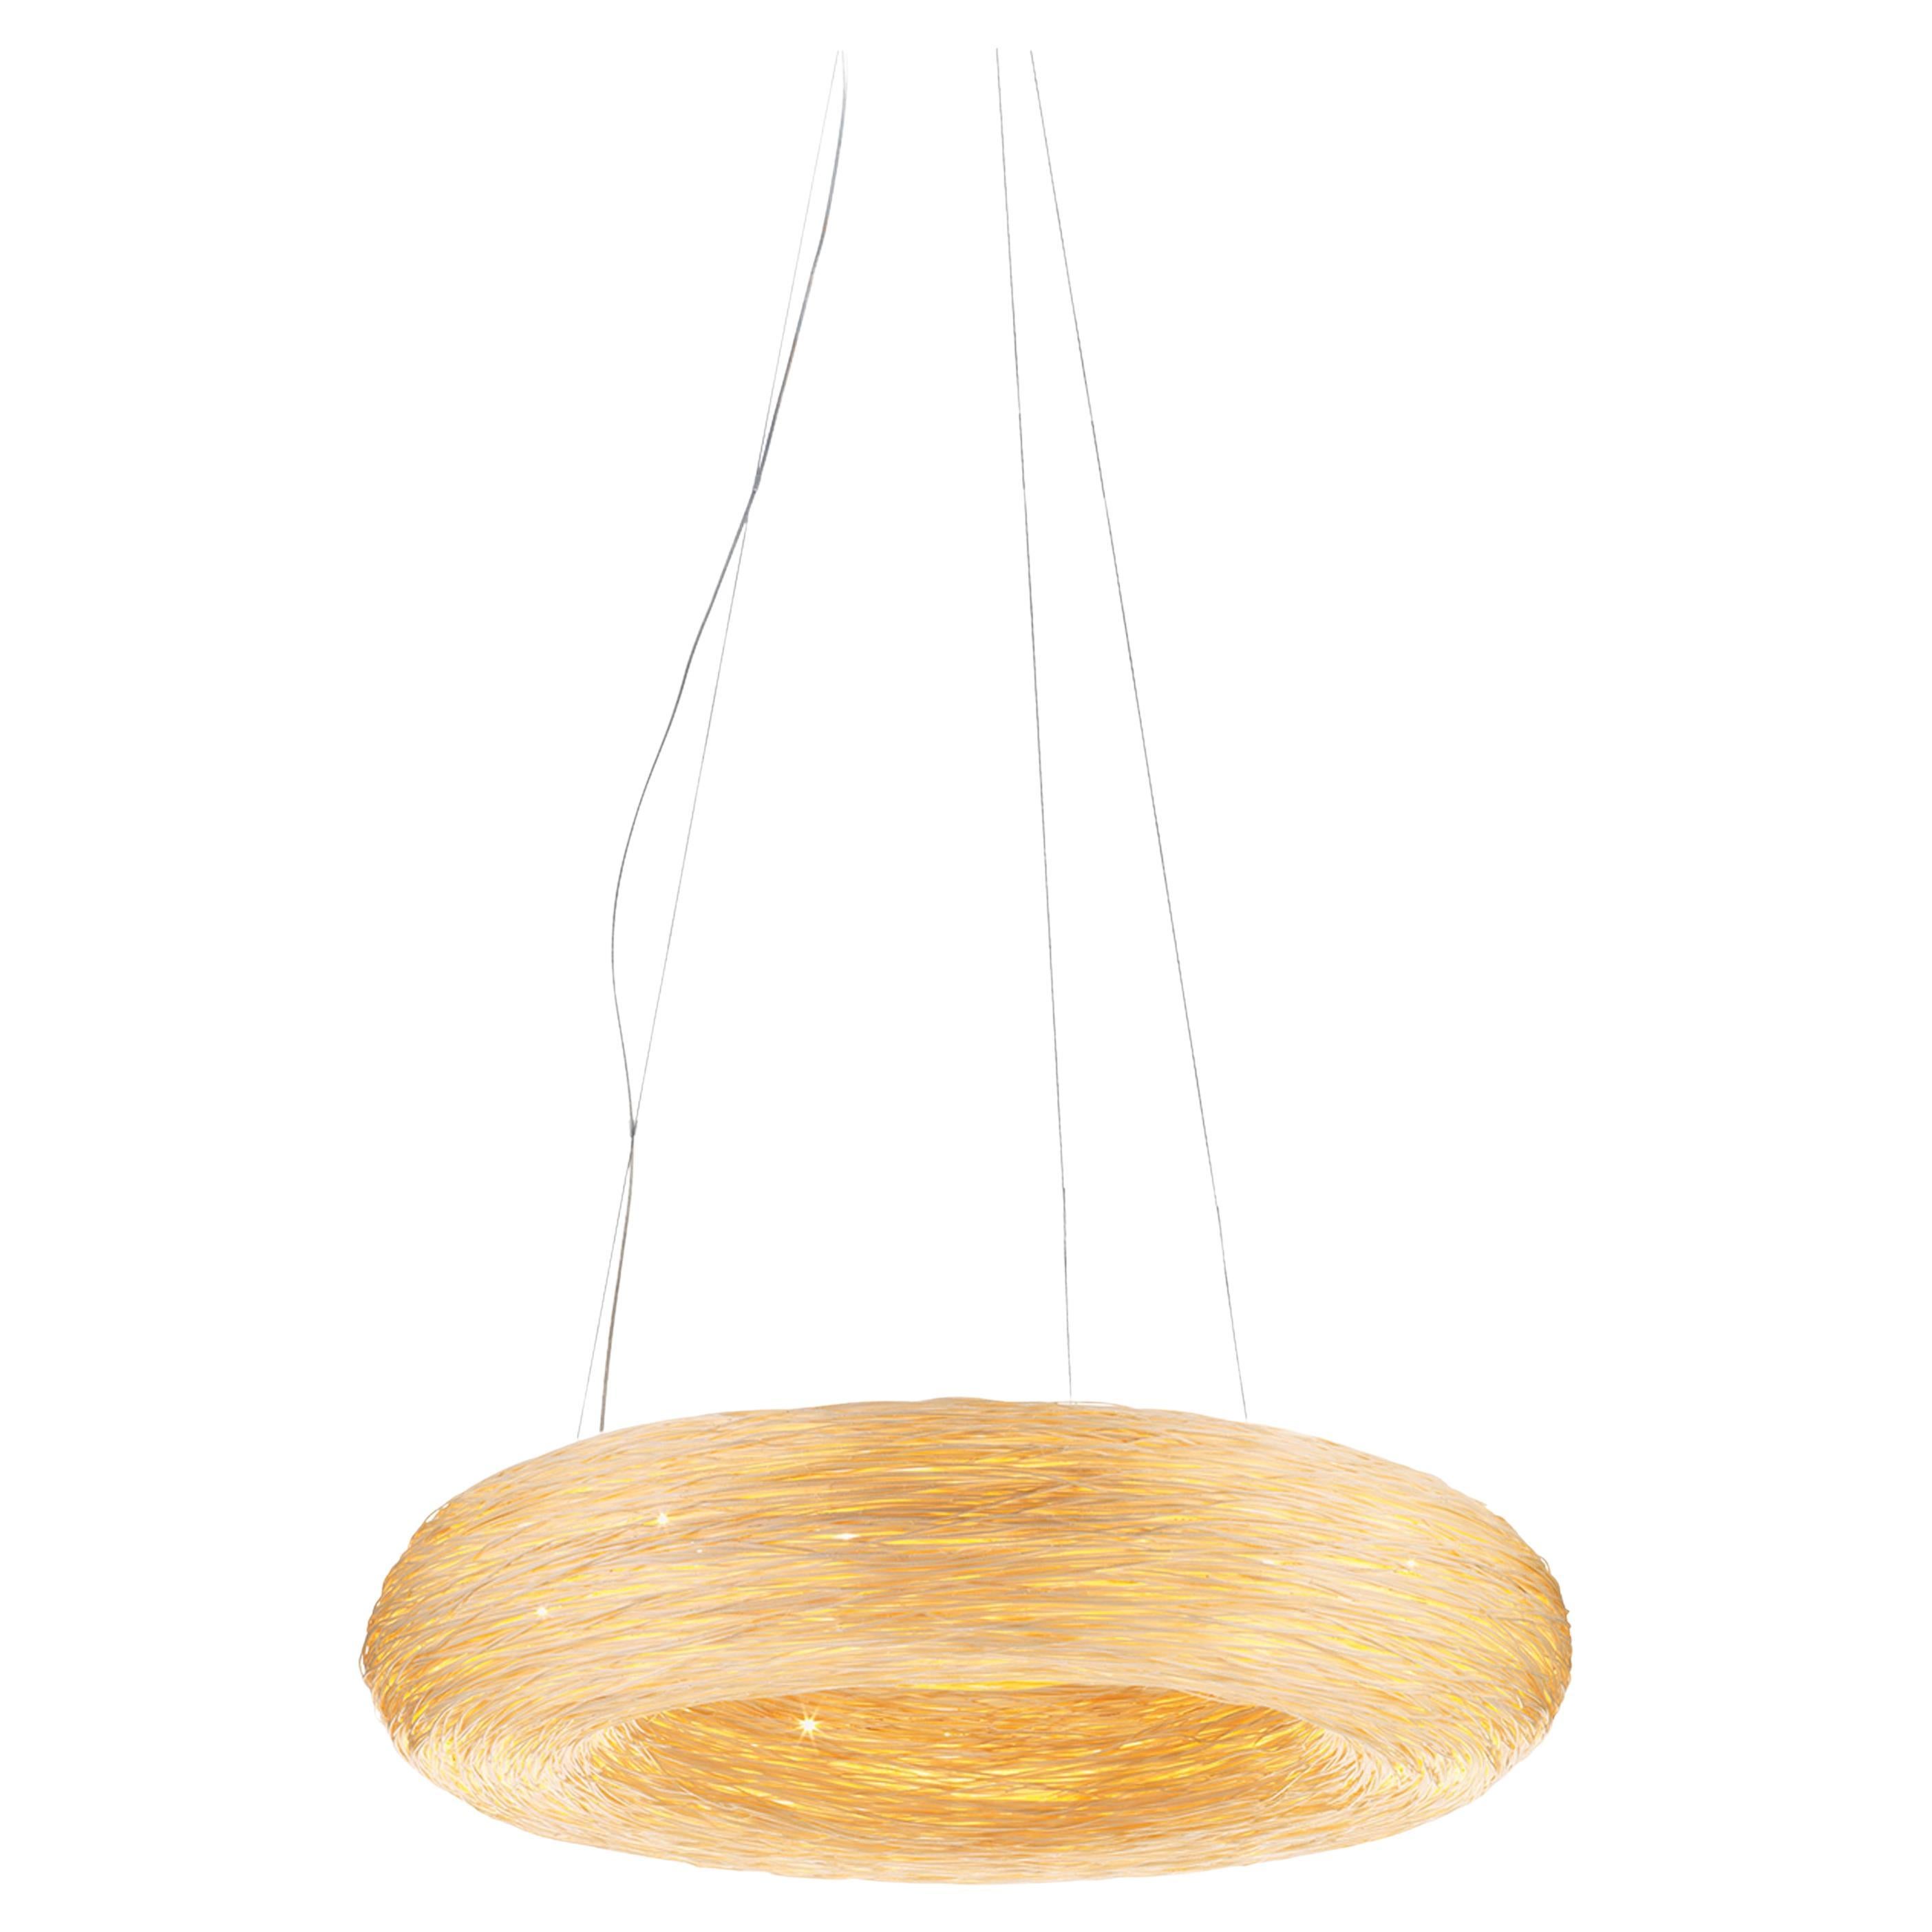 Yellow Crown by Ango, Hand-woven pendant light in a timeless circular form For Sale